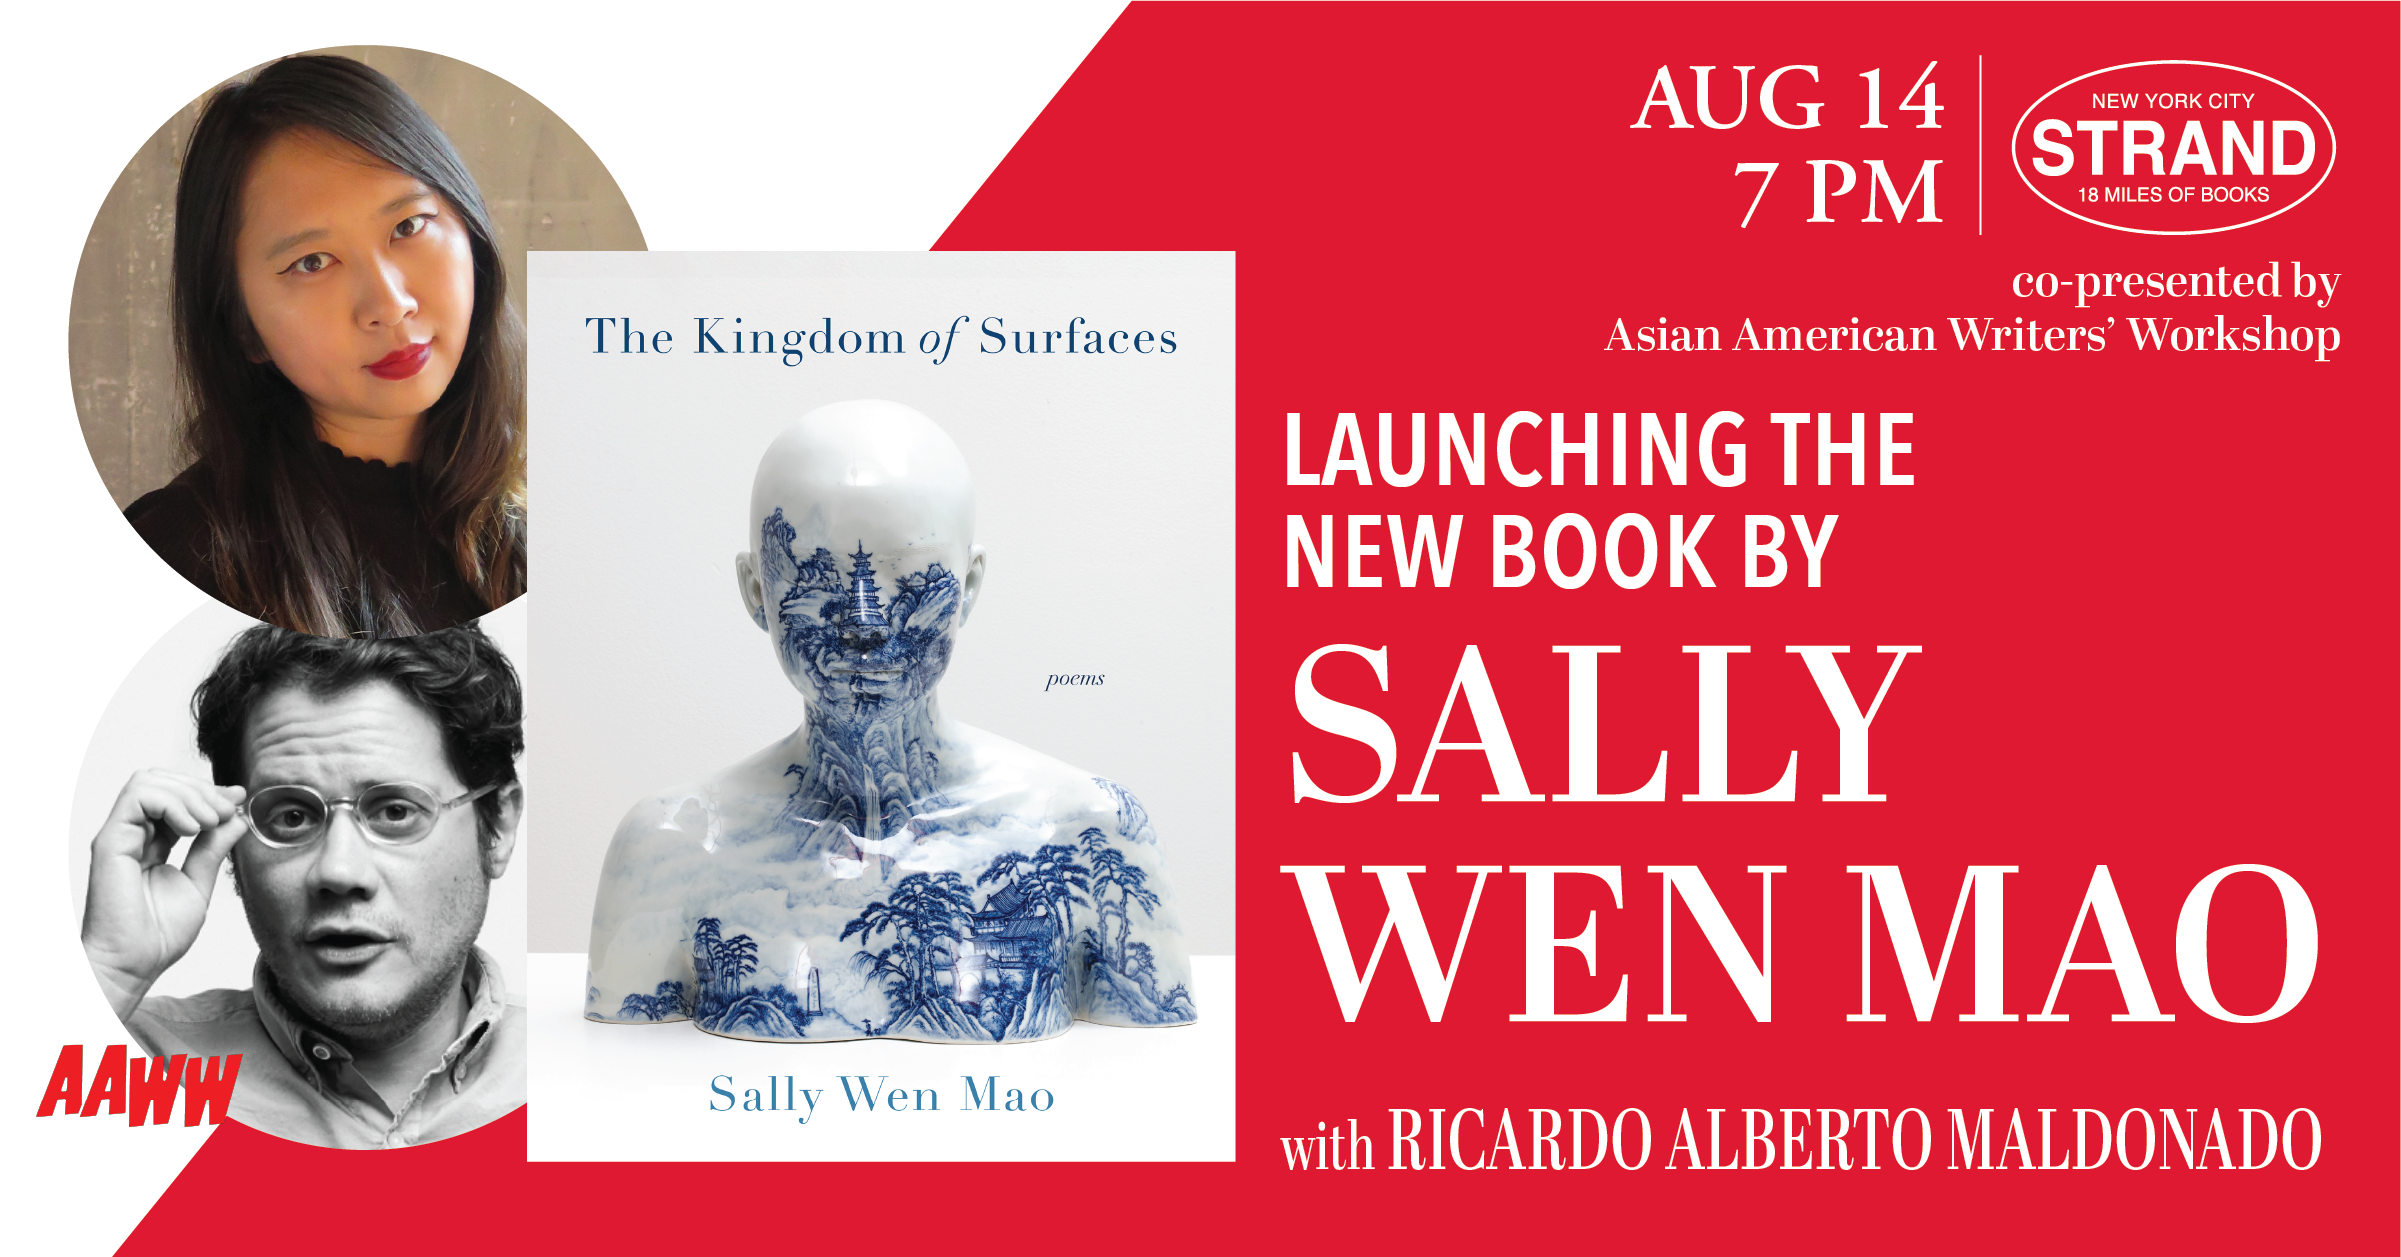 AAWW & The Strand Present: Sally Wen Mao's The Kingdom of Surfaces